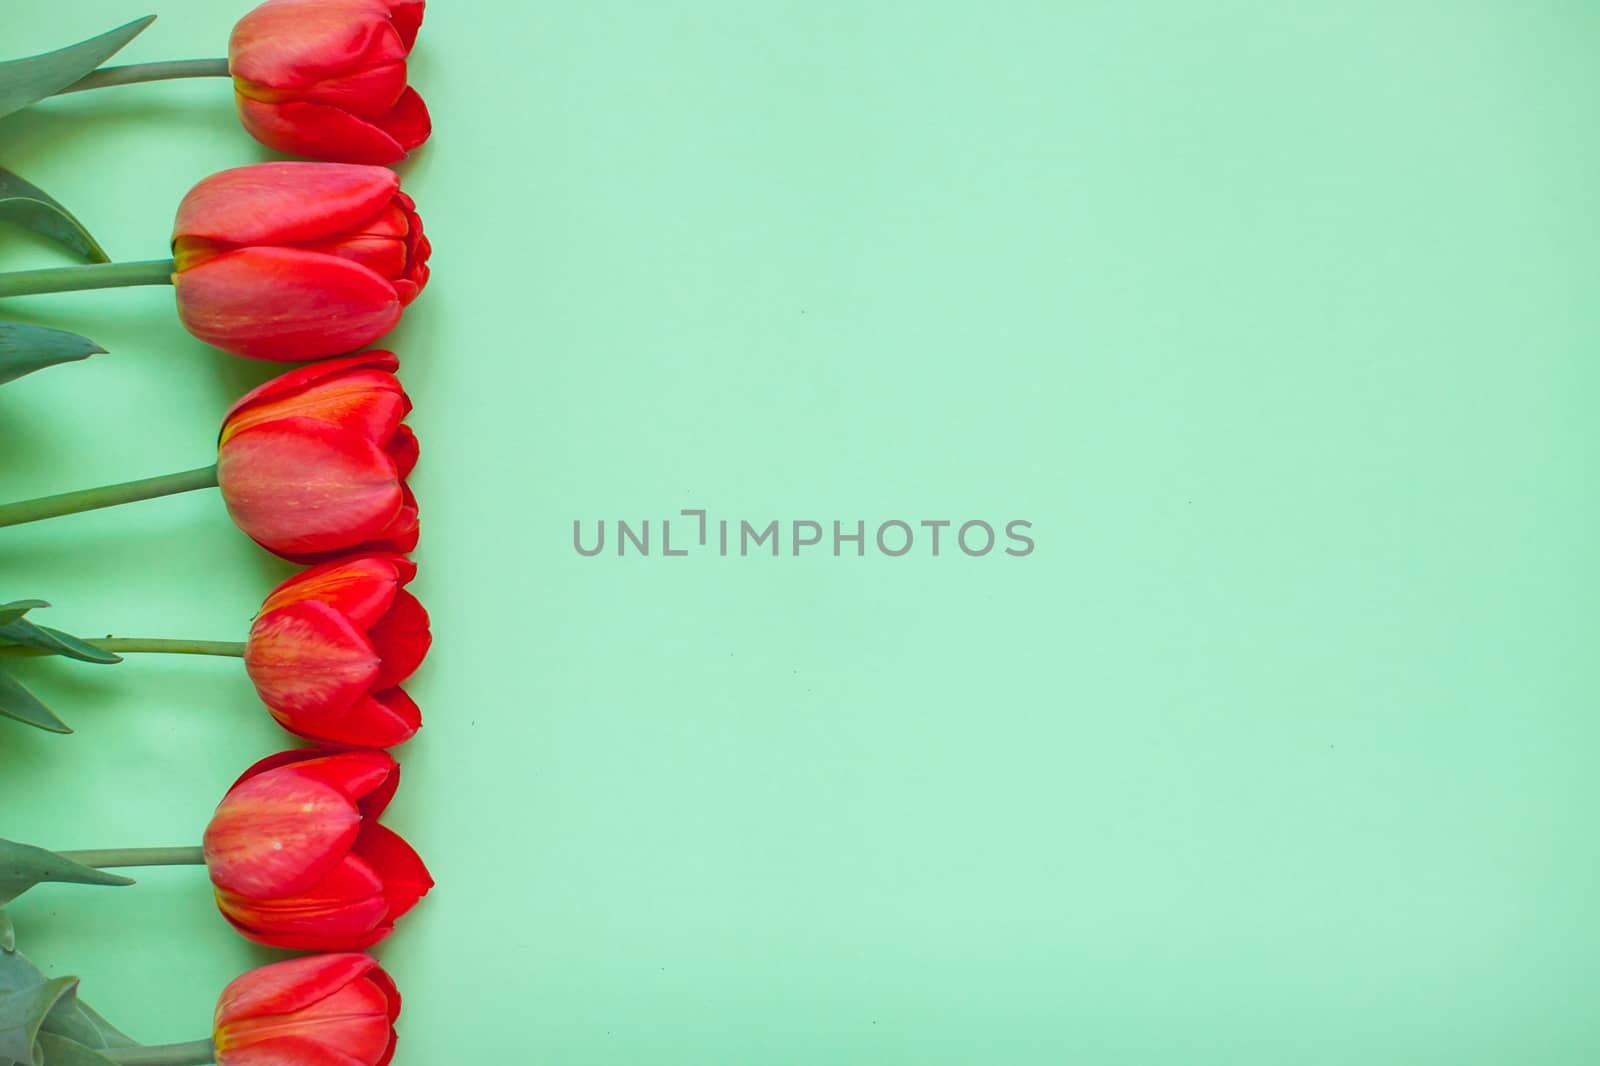 Layout of red bright tulips on a green background